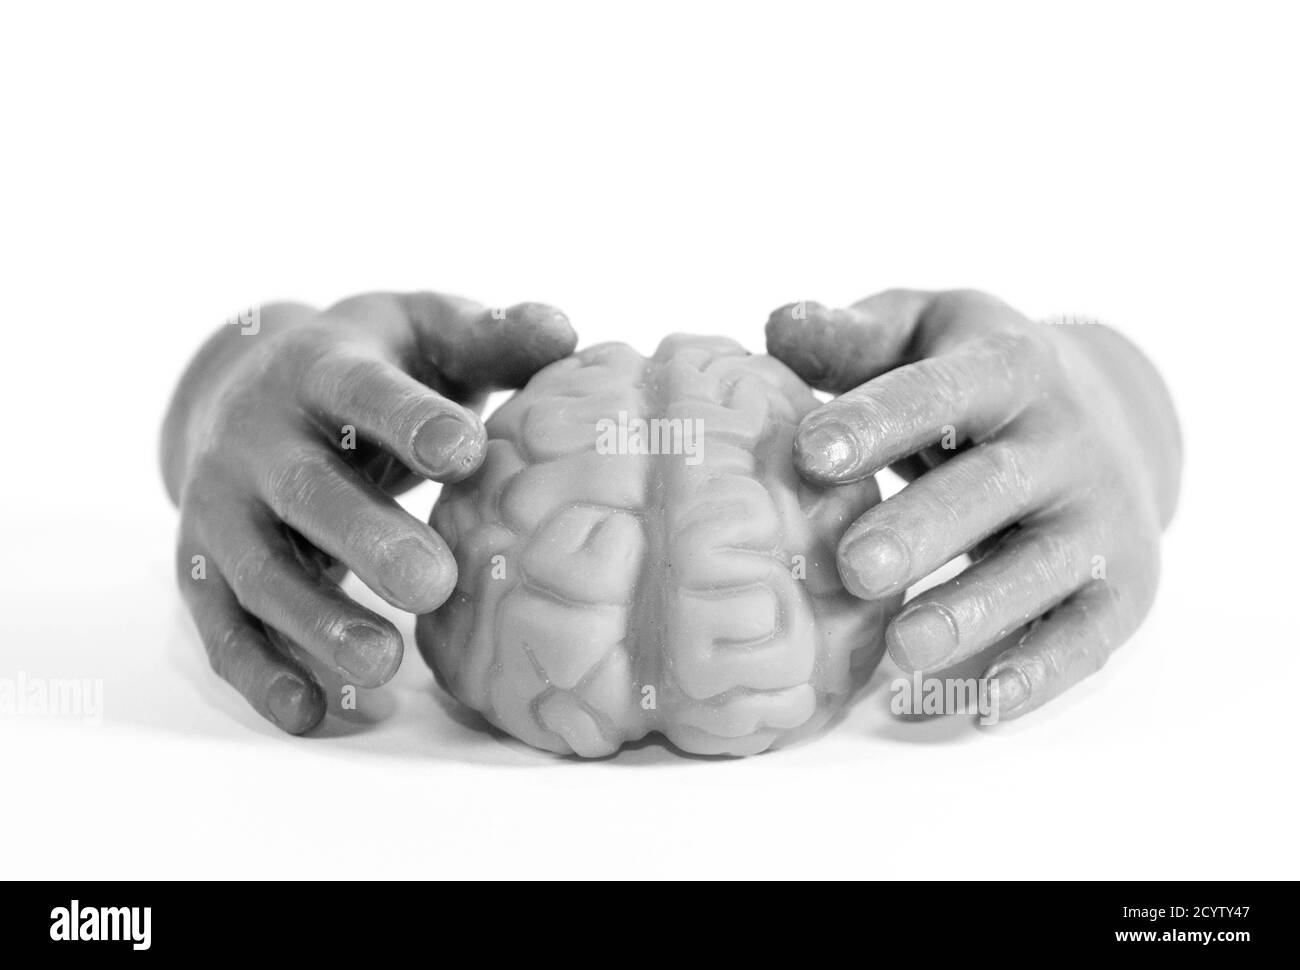 Human hands holding a human brain, shown in black and white. Stock Photo